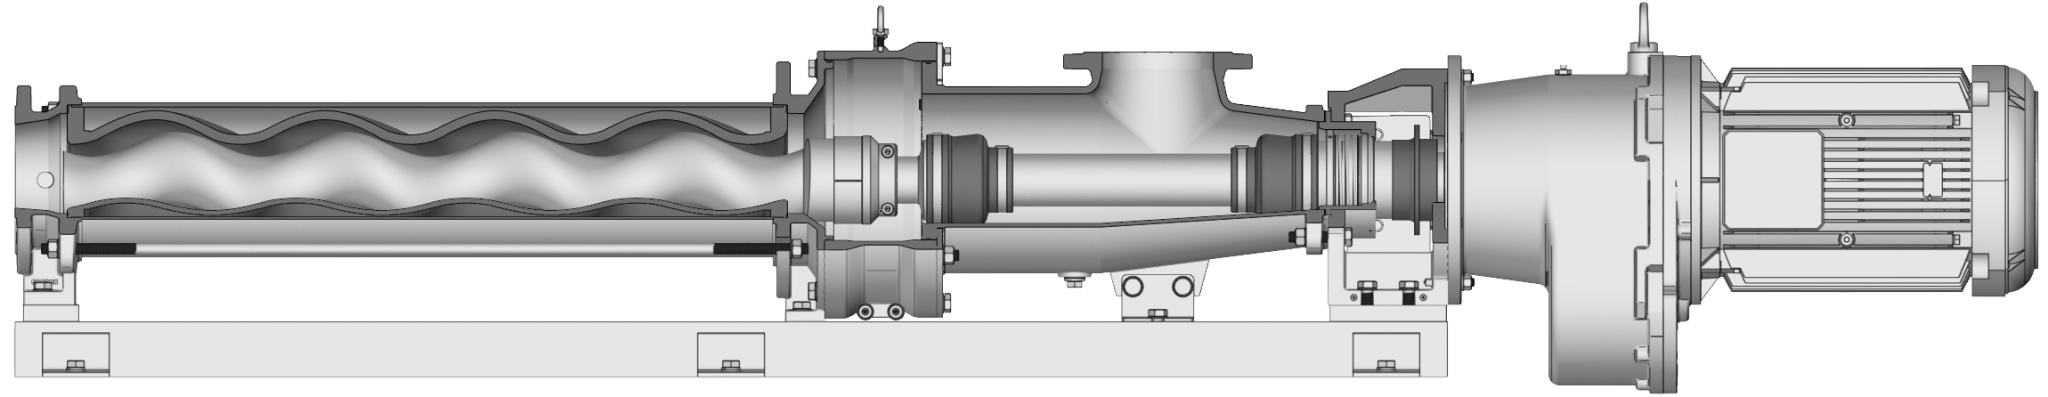 SEEPEX BNM maintain-in-place progressive cavity pump, a large standard pump fitted with smart maintenance solutions.